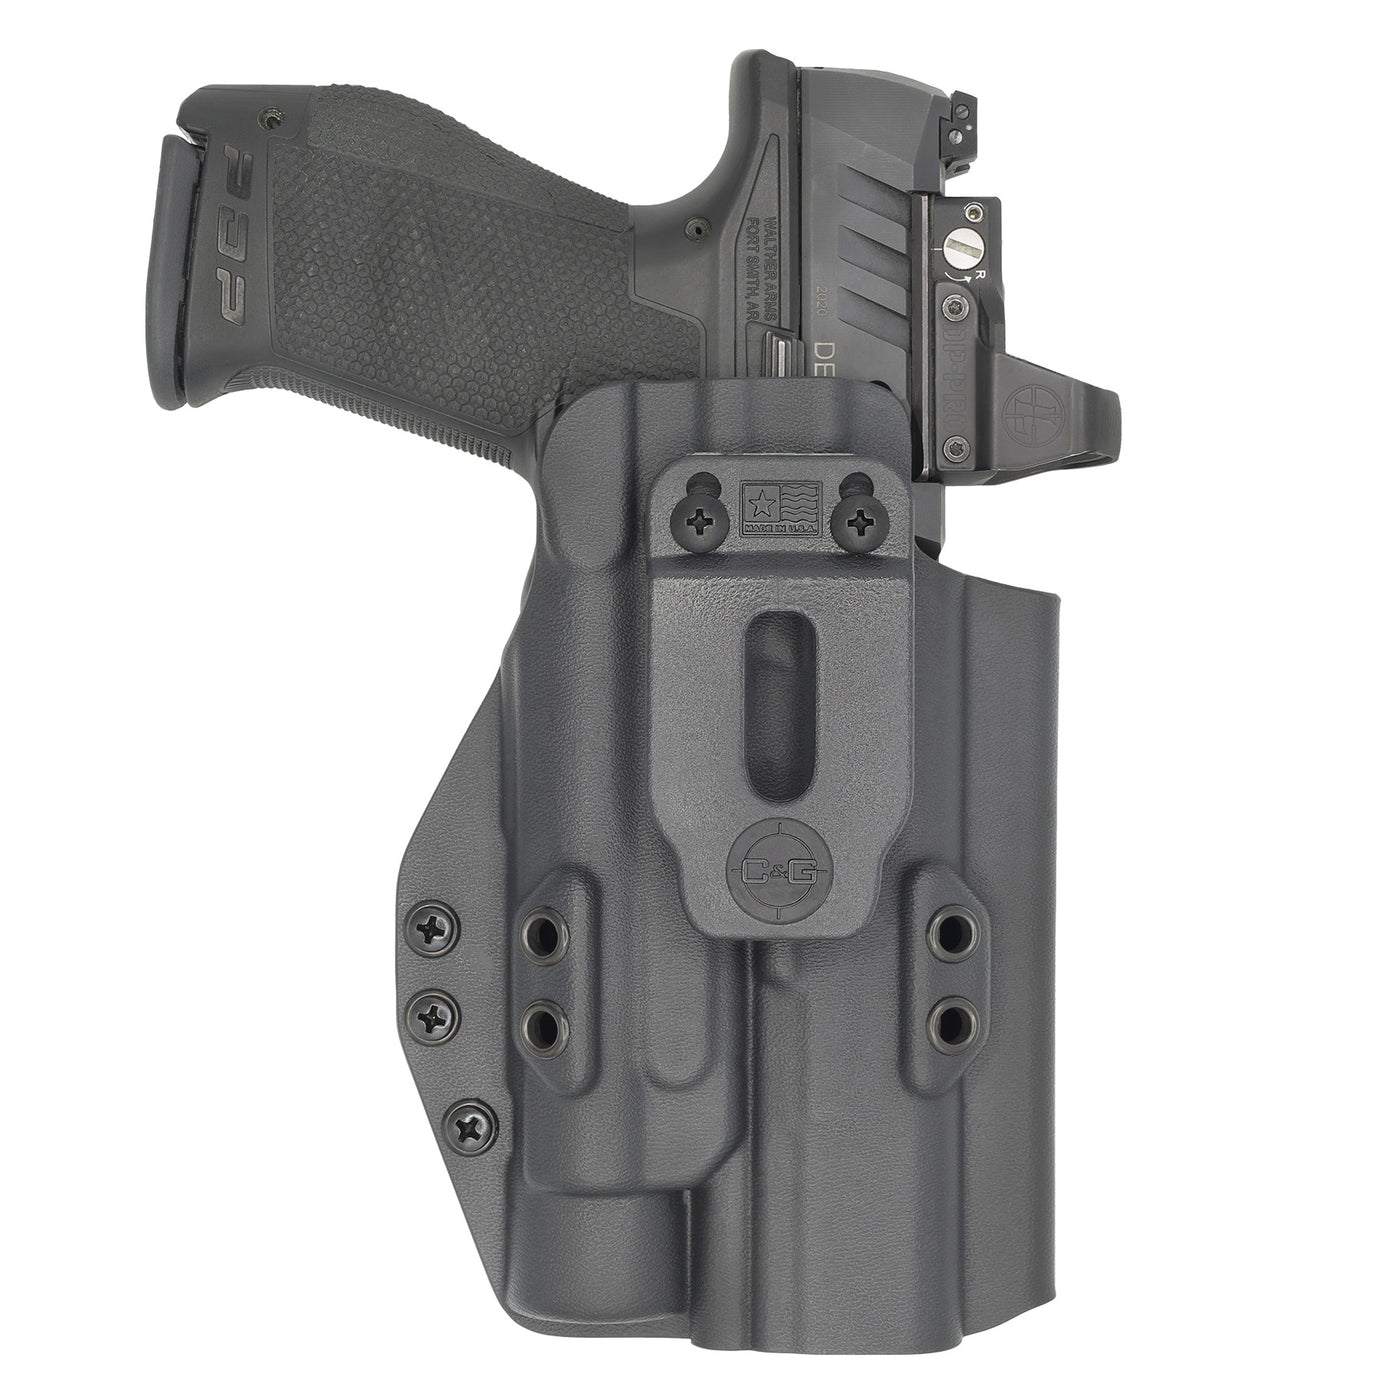 C&G Holsters custom IWB Tactical CZ P07/9 TLR1 in holstered position